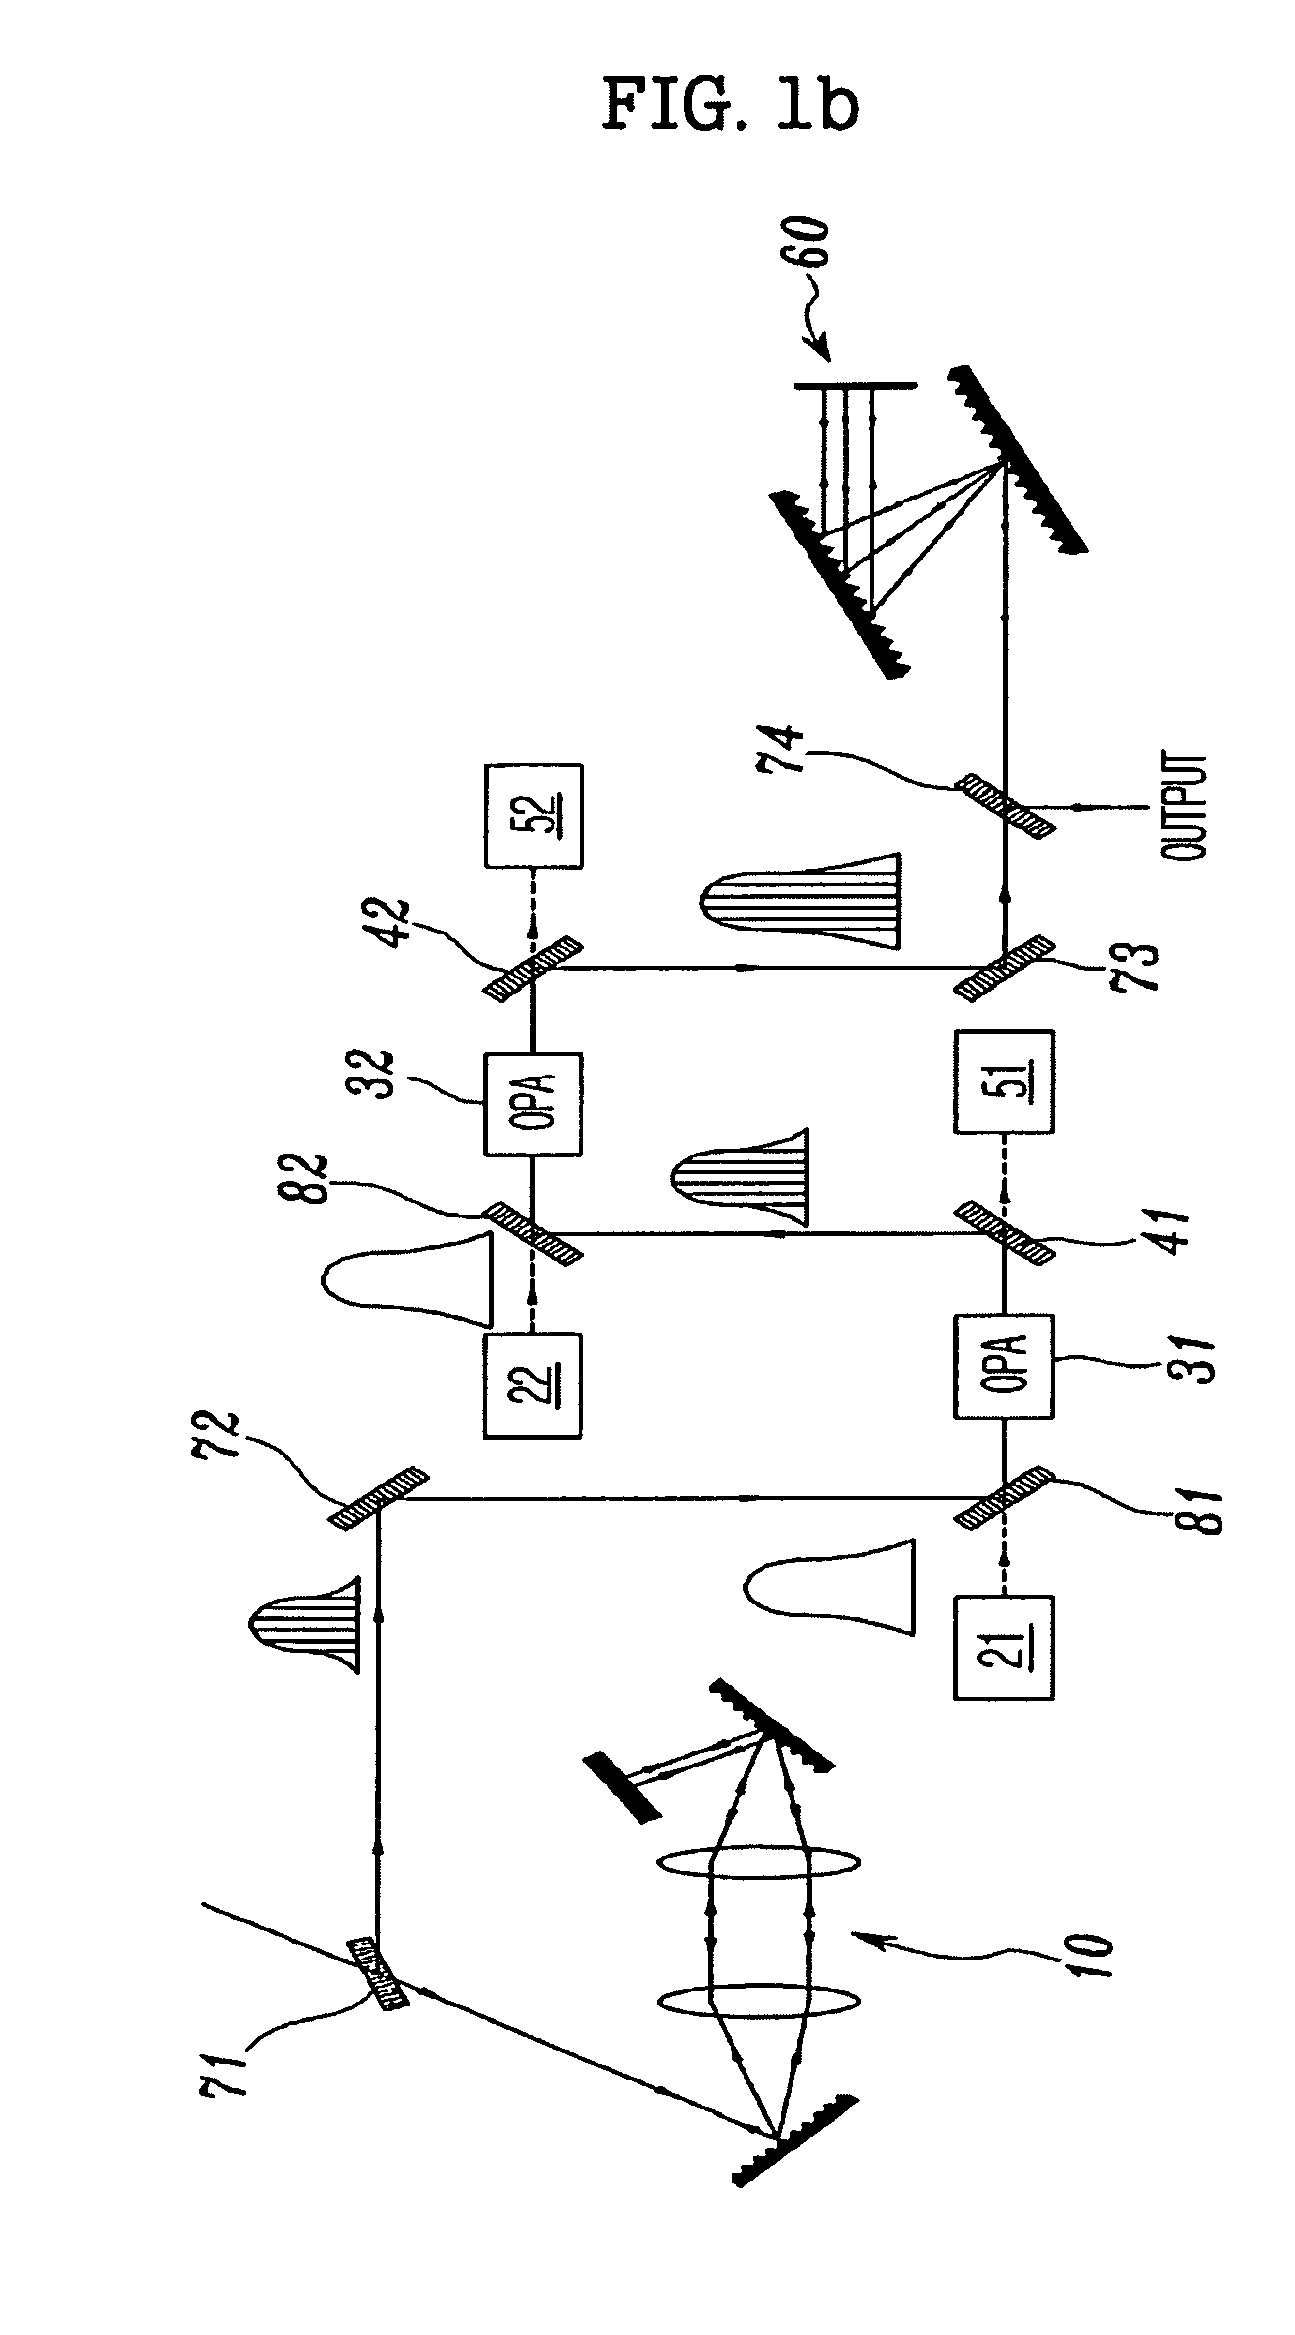 Apparatus for spectrum-doubled optical parametric chirped pulse amplification (OPCPA) using third-order dispersion chirping